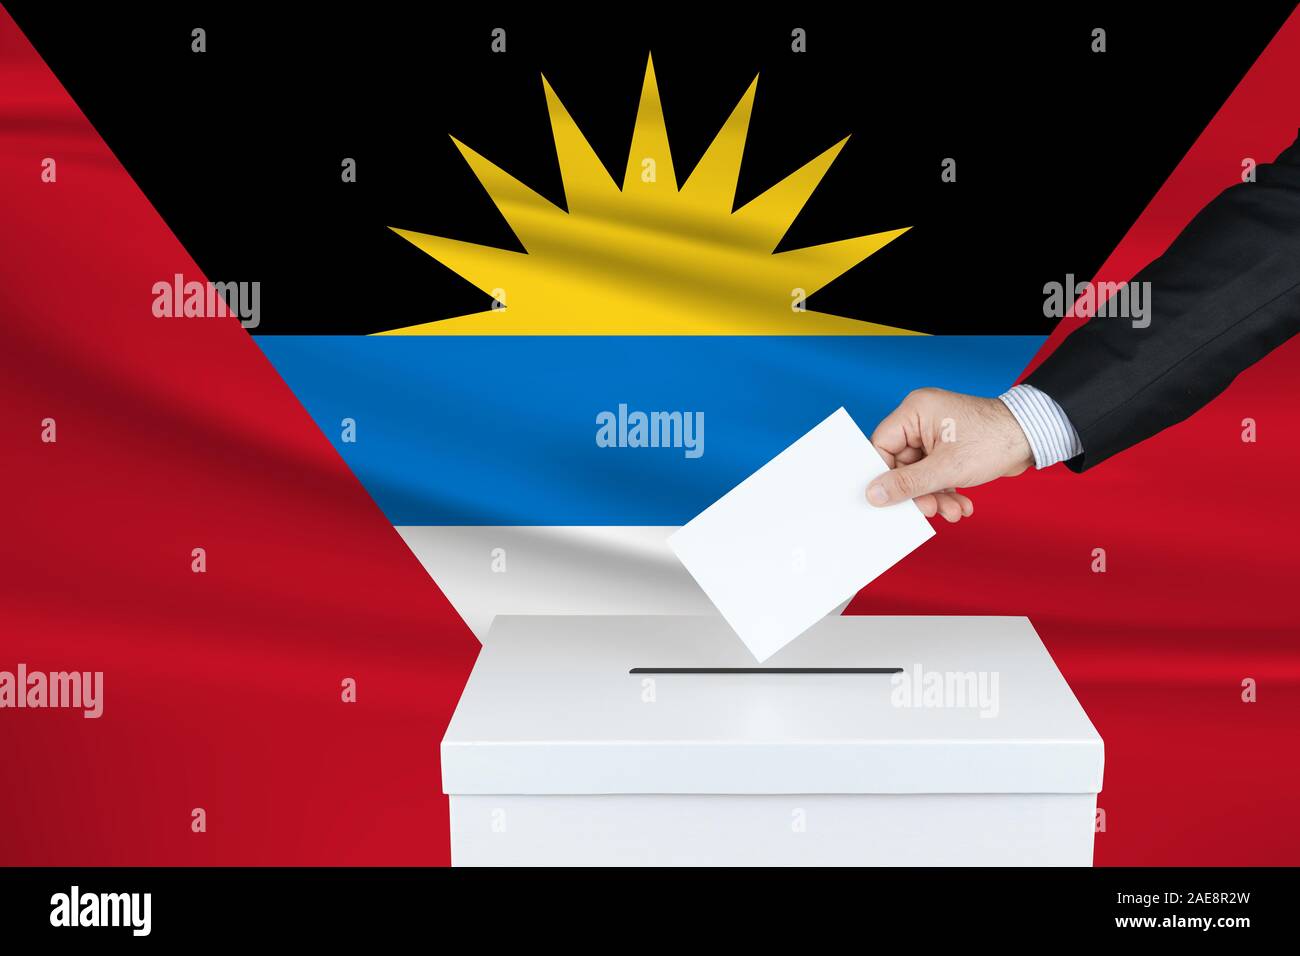 Election in Antigua. The hand of man putting his vote in the ballot box. Waved Antigua flag on background. Stock Photo